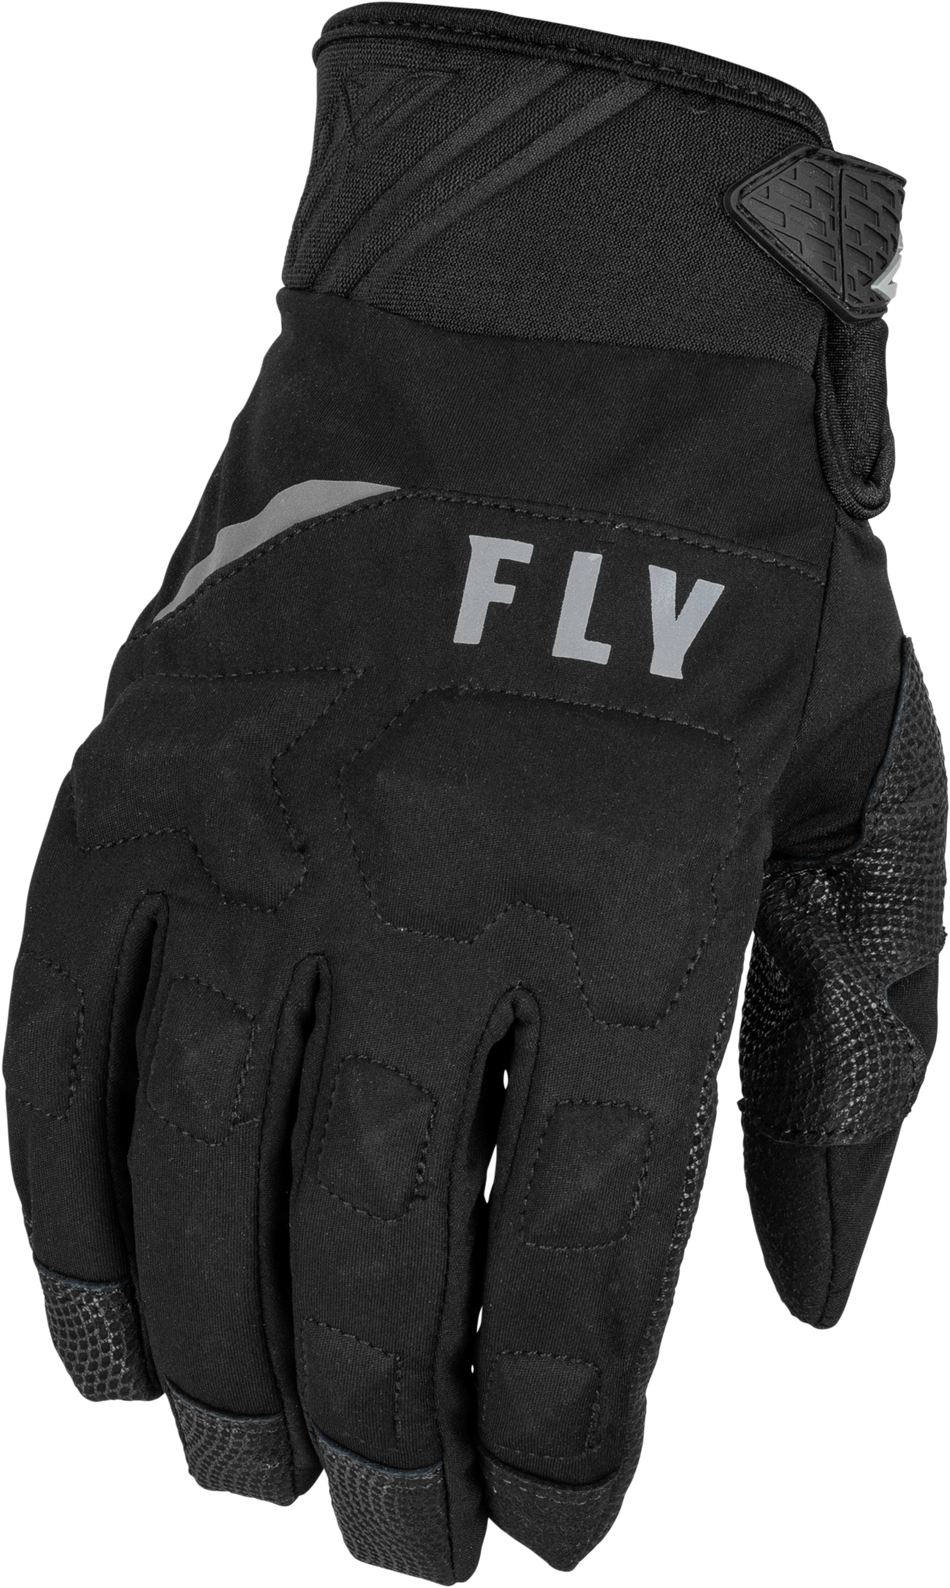 FLY RACING Boundary Gloves Black Xs 371-0700XS